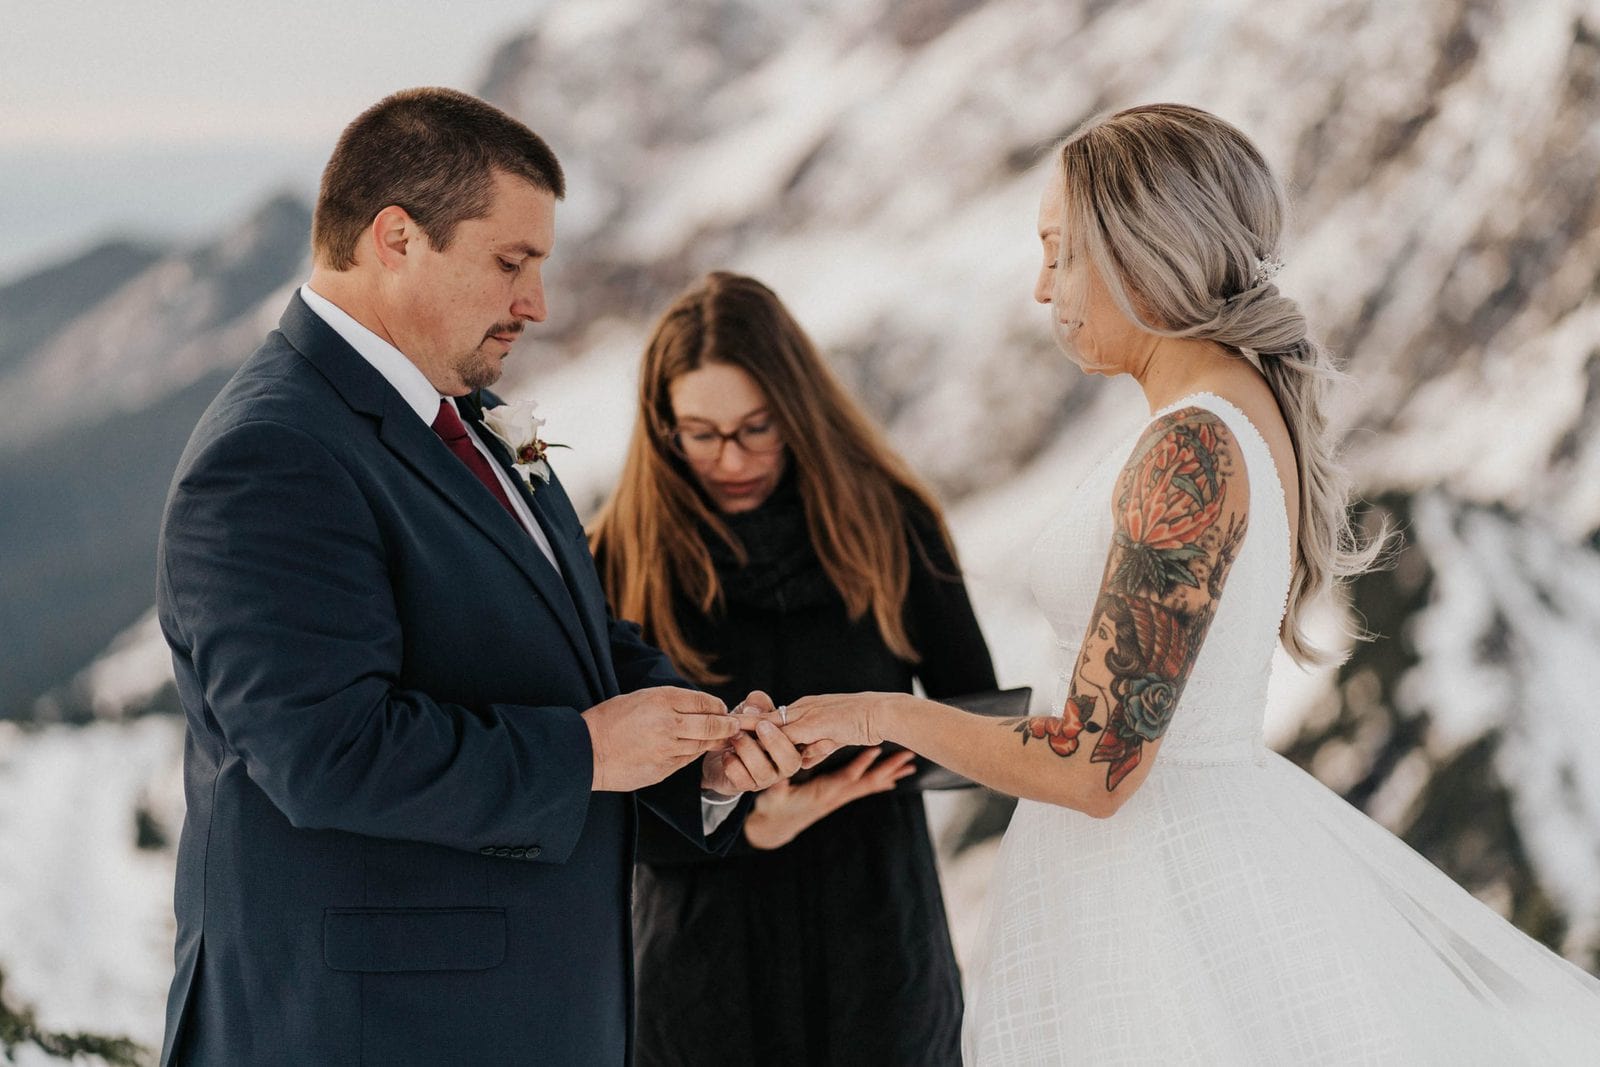 groom putting ring on bride at ceremony